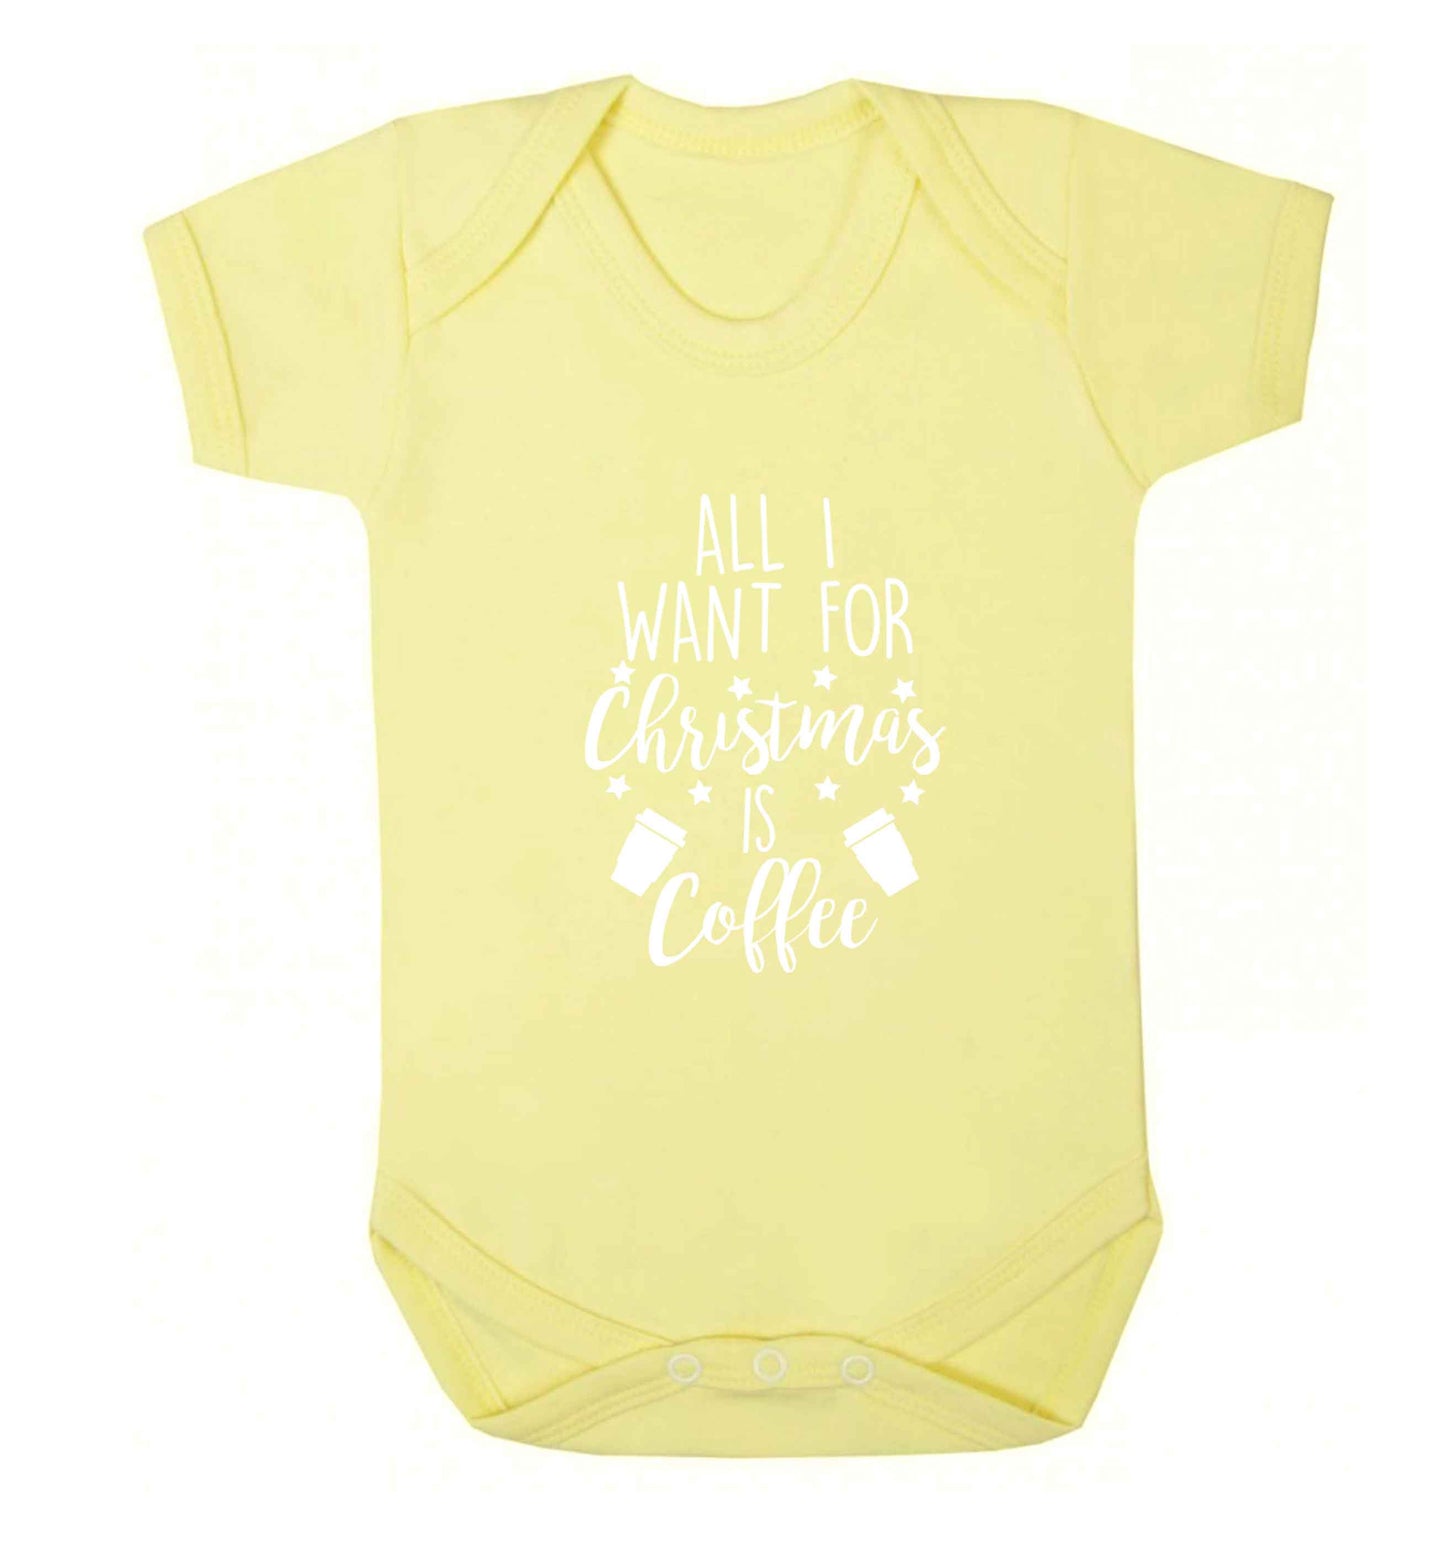 All I want for Christmas is coffee Baby Vest pale yellow 18-24 months